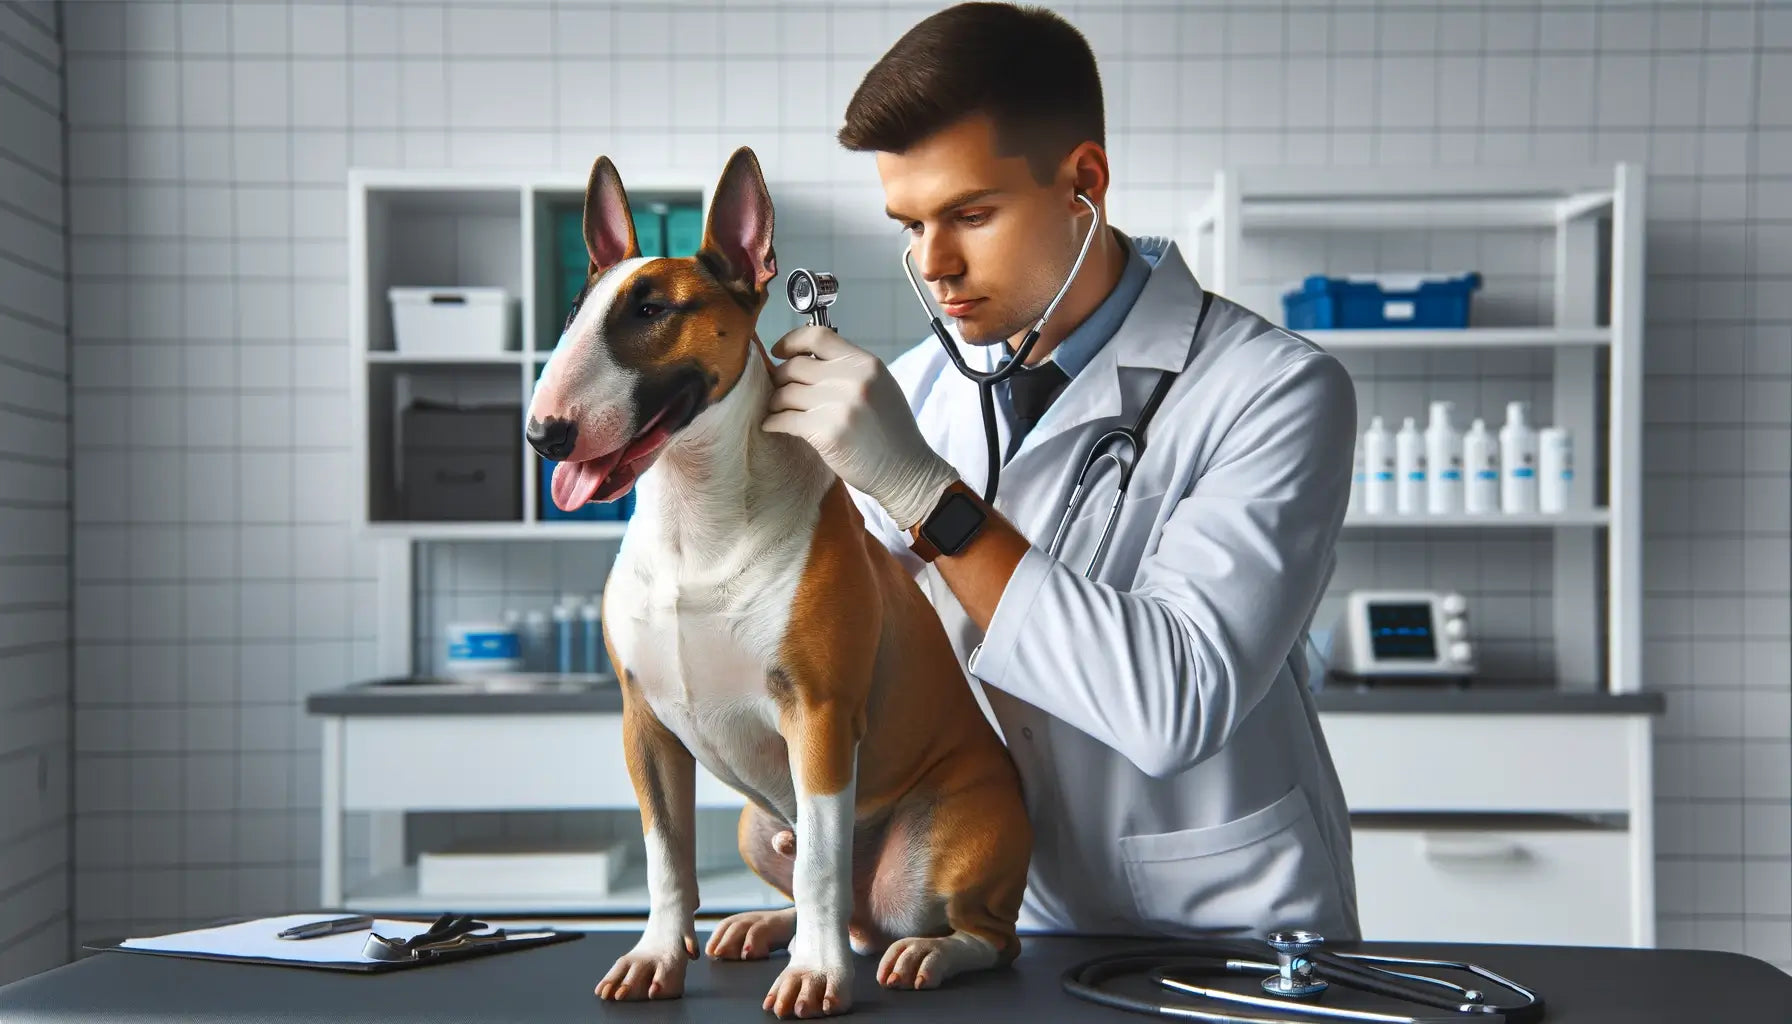 A Bull Terrier receives a health check from a veterinarian in a well-equipped veterinary clinic.